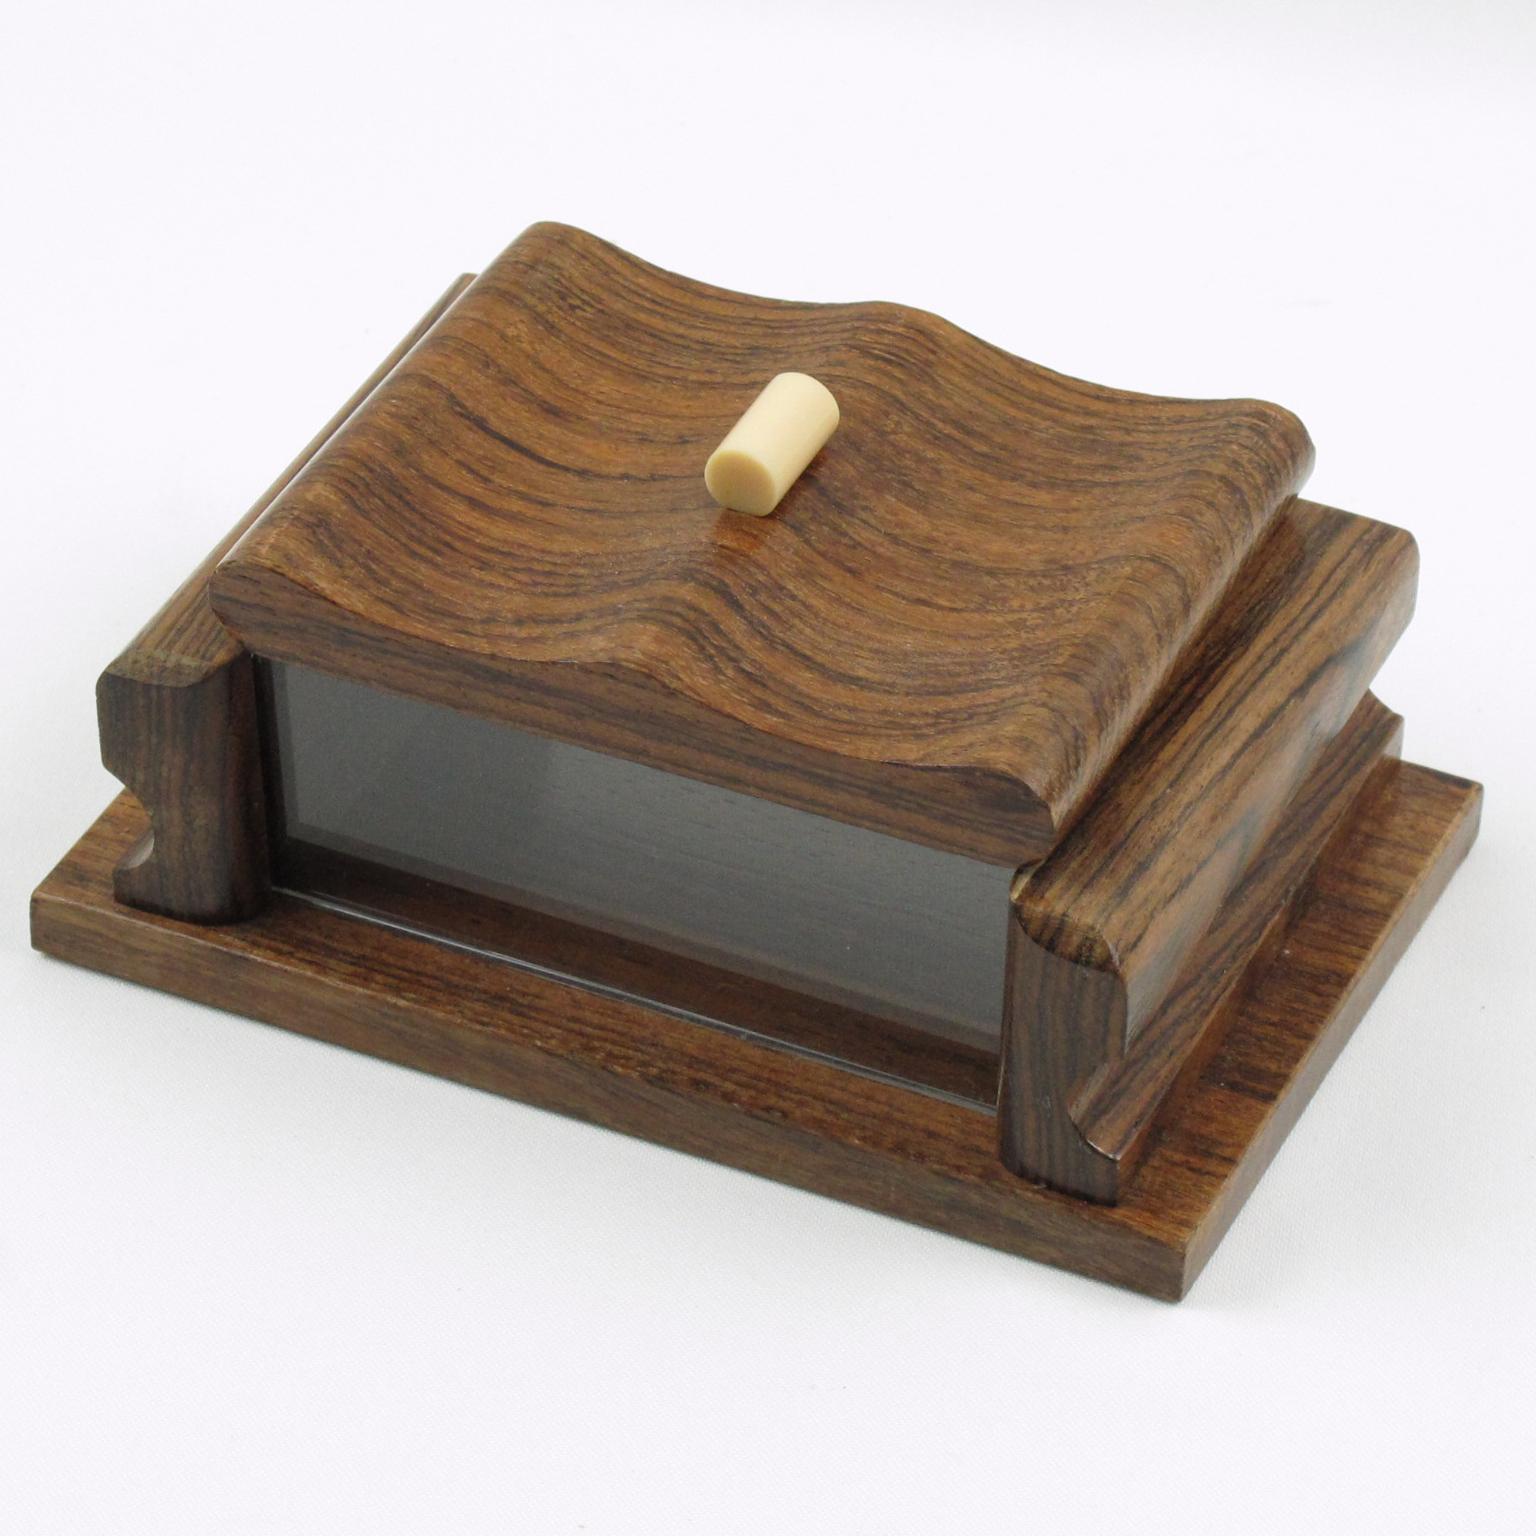 Mid-20th Century Art Deco Wood and Lucite Box, France 1940s For Sale